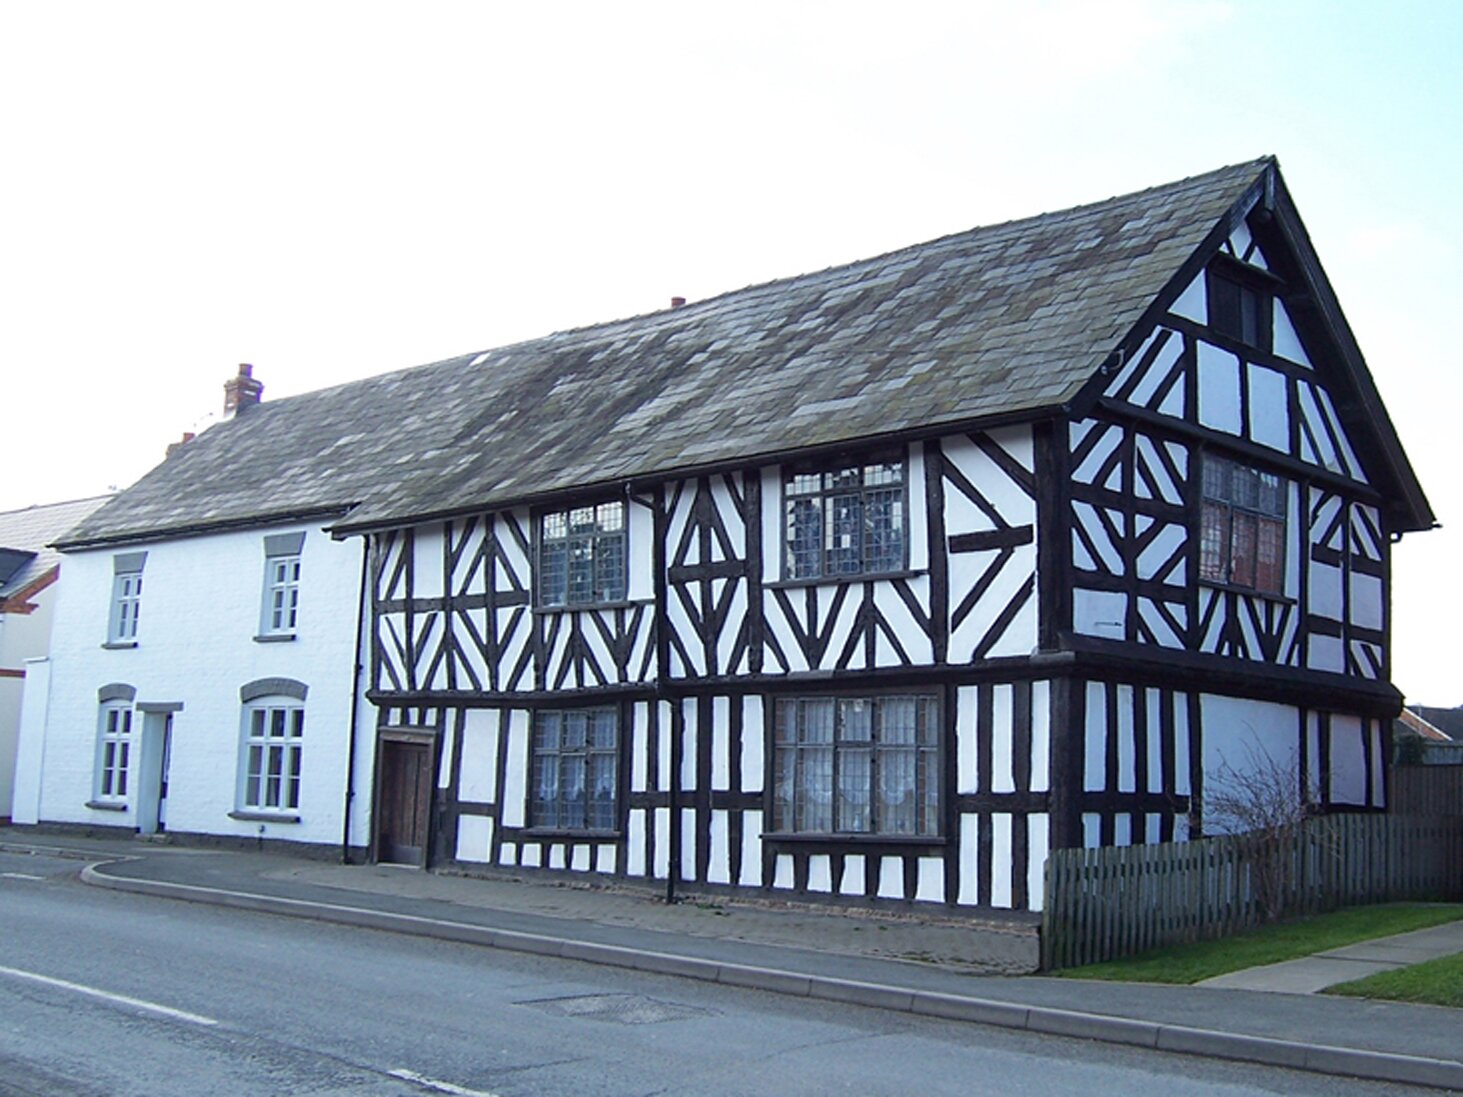 Black and white timber frame house in Leominster, Herefordshire - Send us your photographs of black and whites